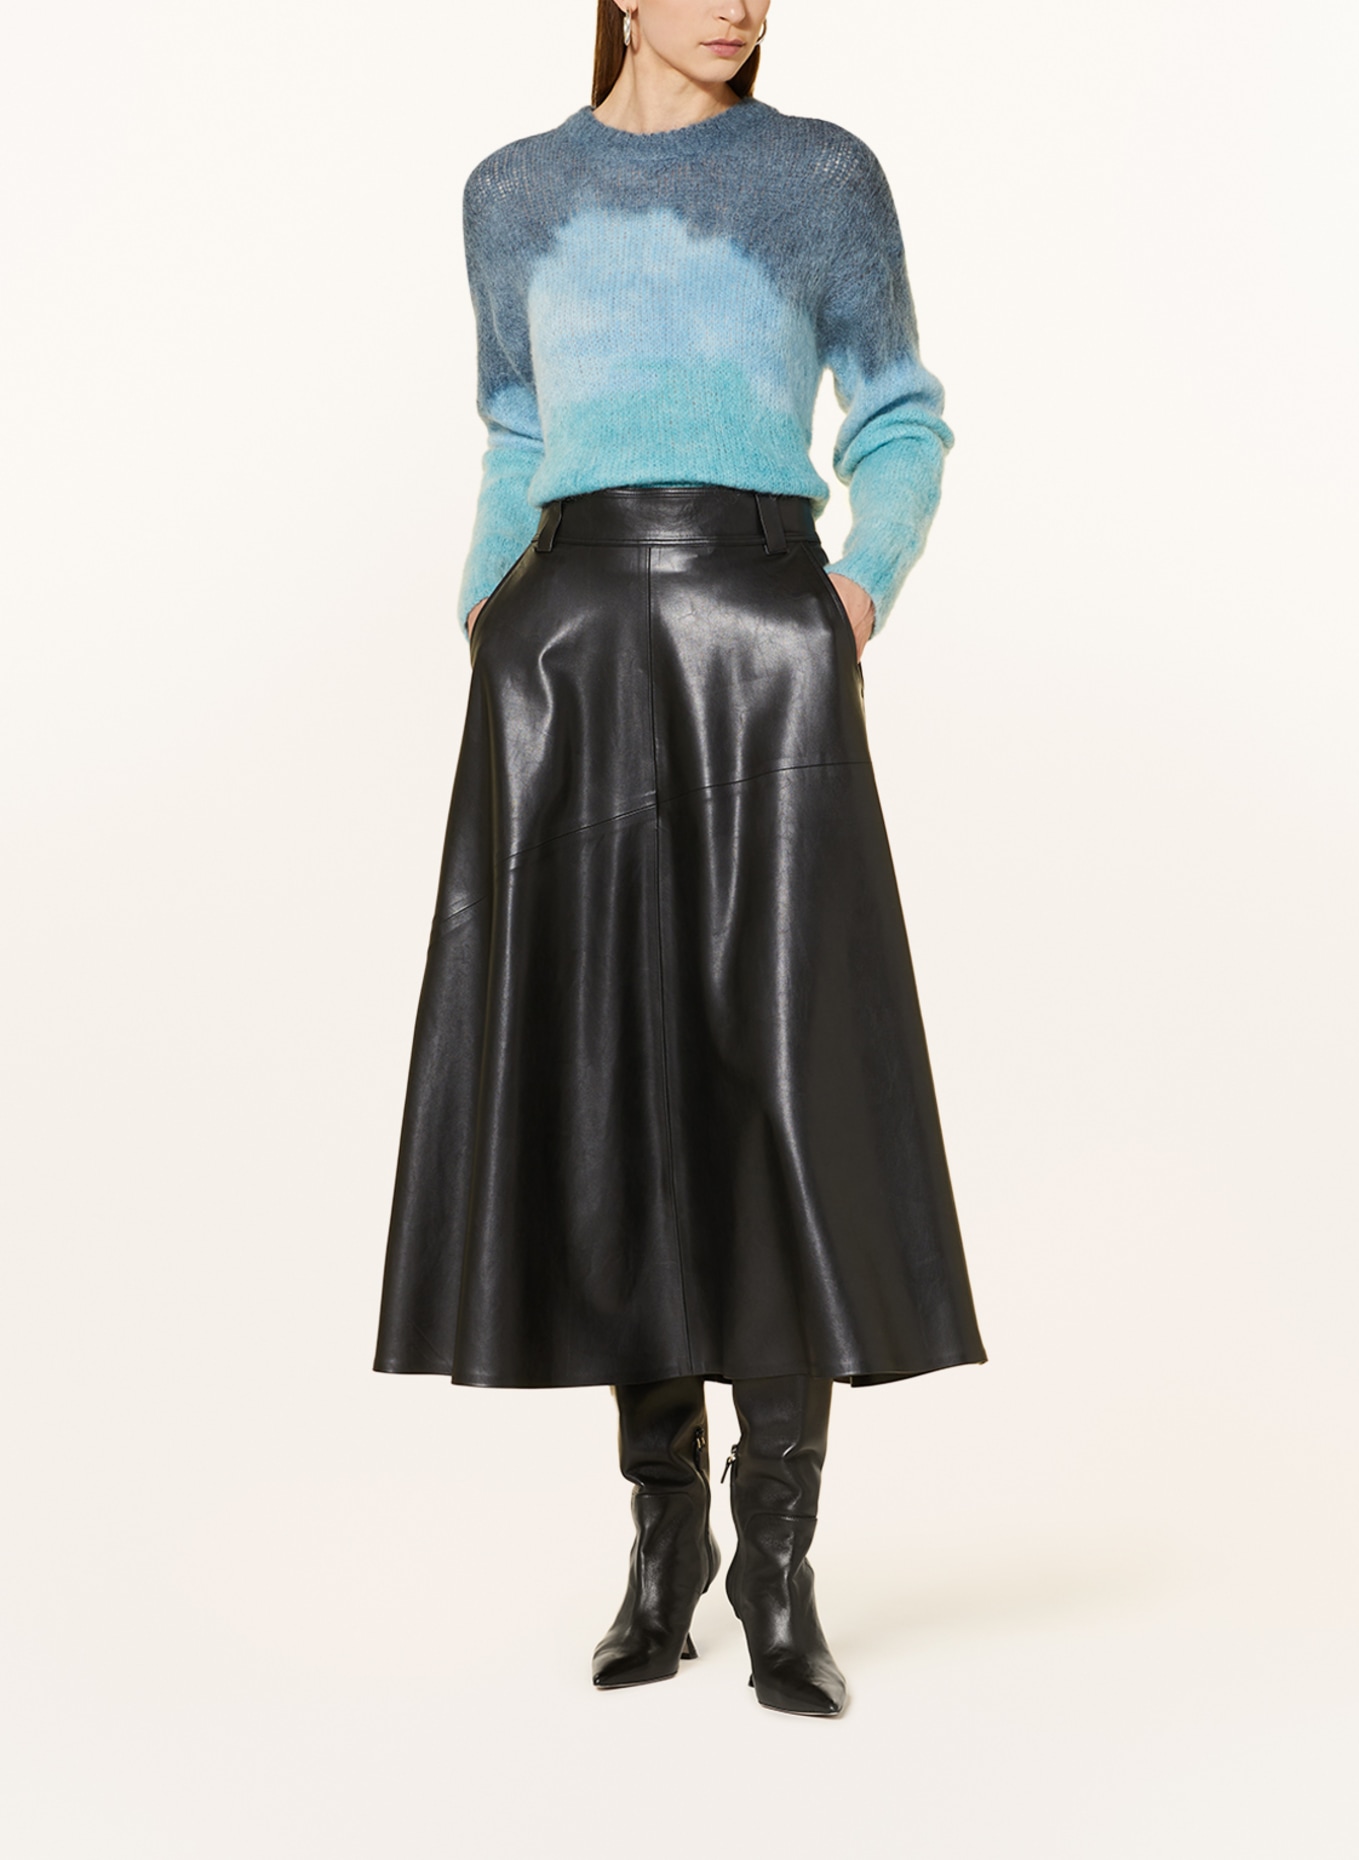 CATNOIR Sweater with mohair, Color: TURQUOISE/ LIGHT BLUE (Image 2)